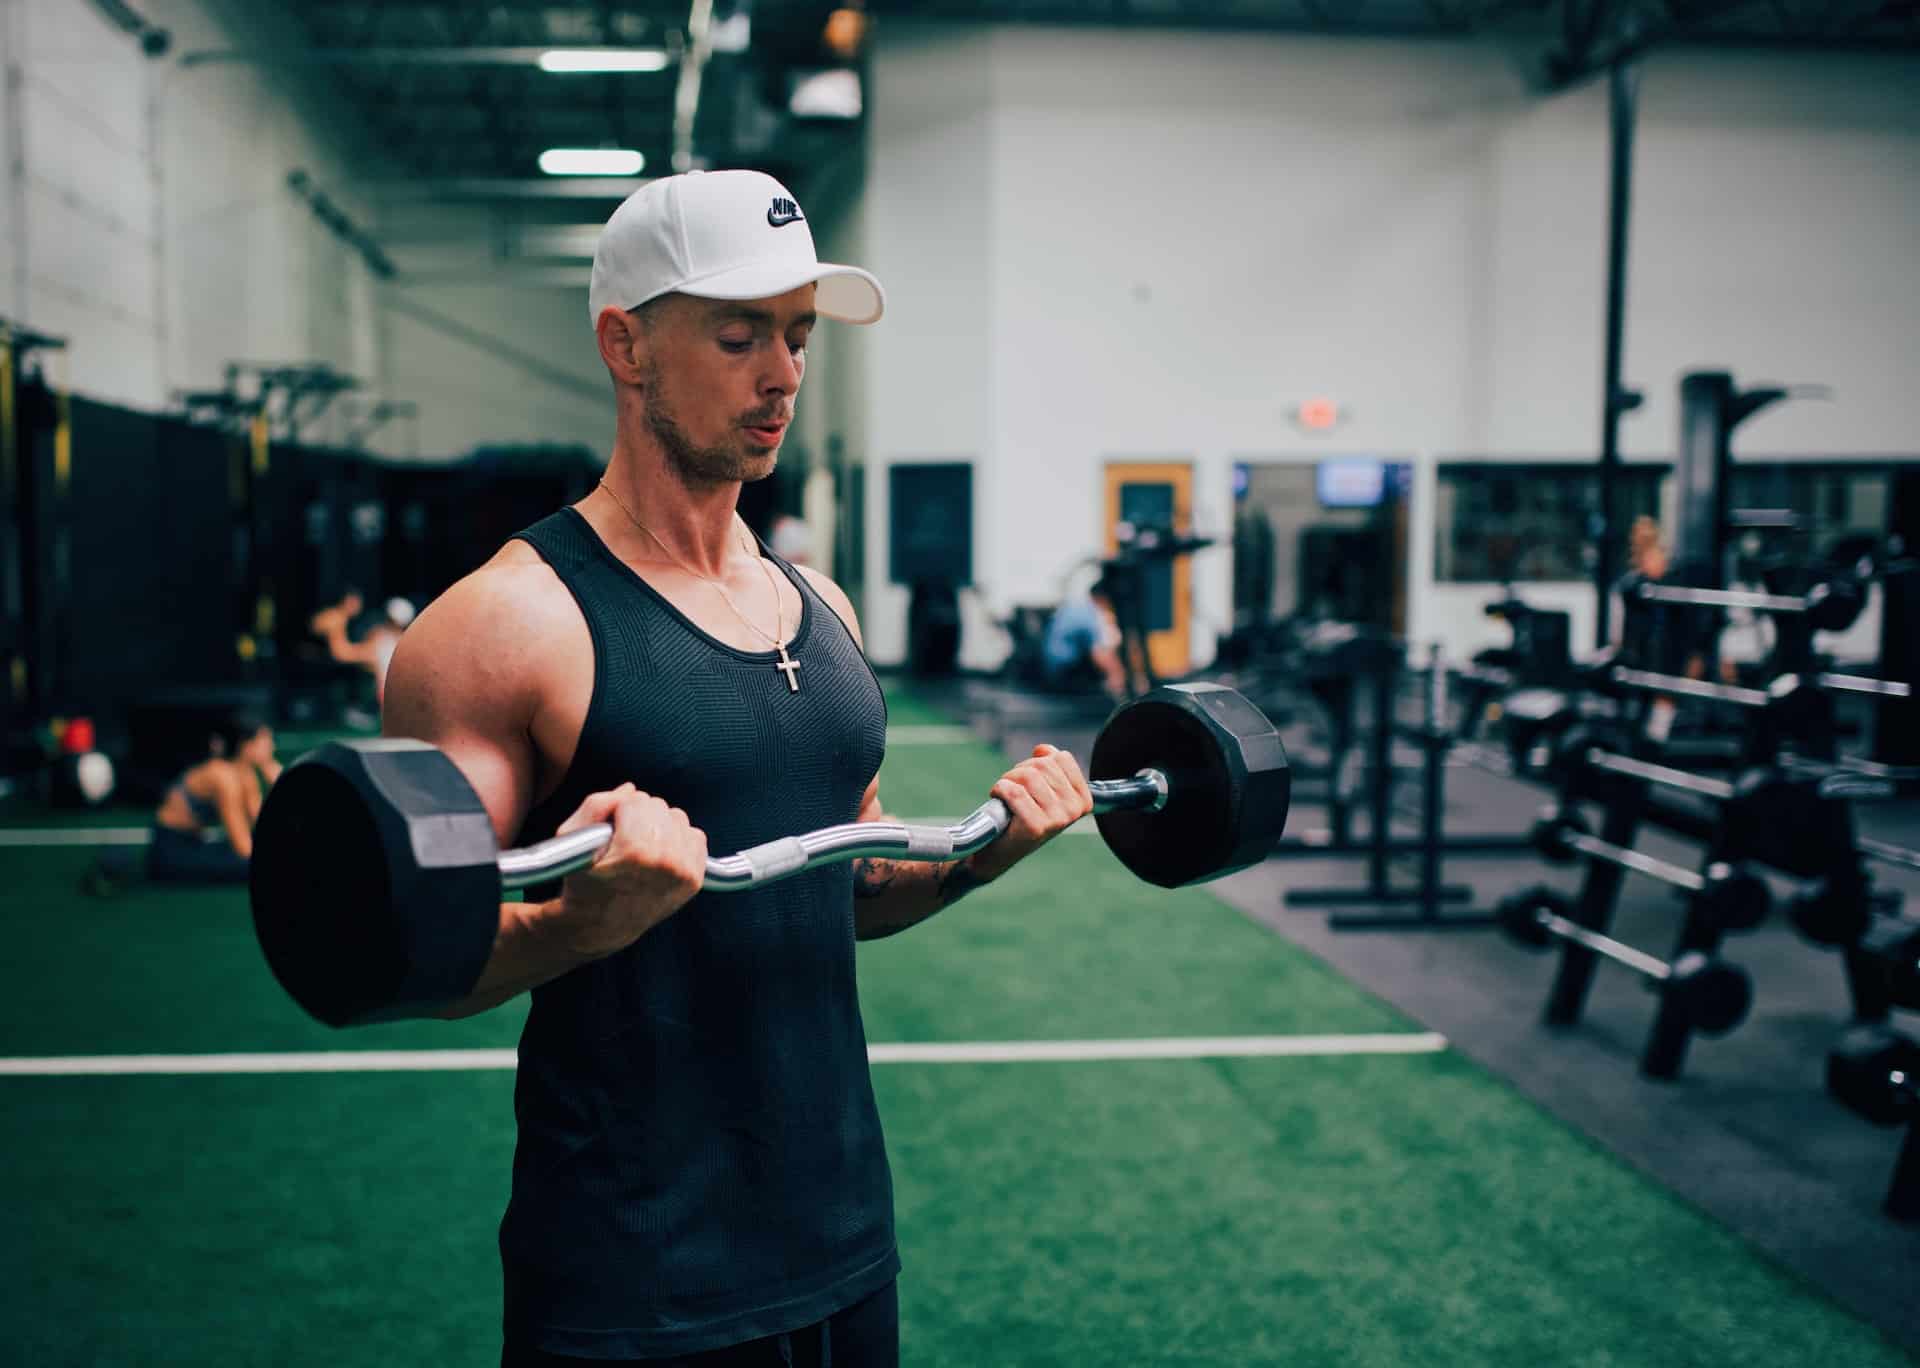 5 Best Workout Hats: Gym Hats to Crush Your Workout – American Hat